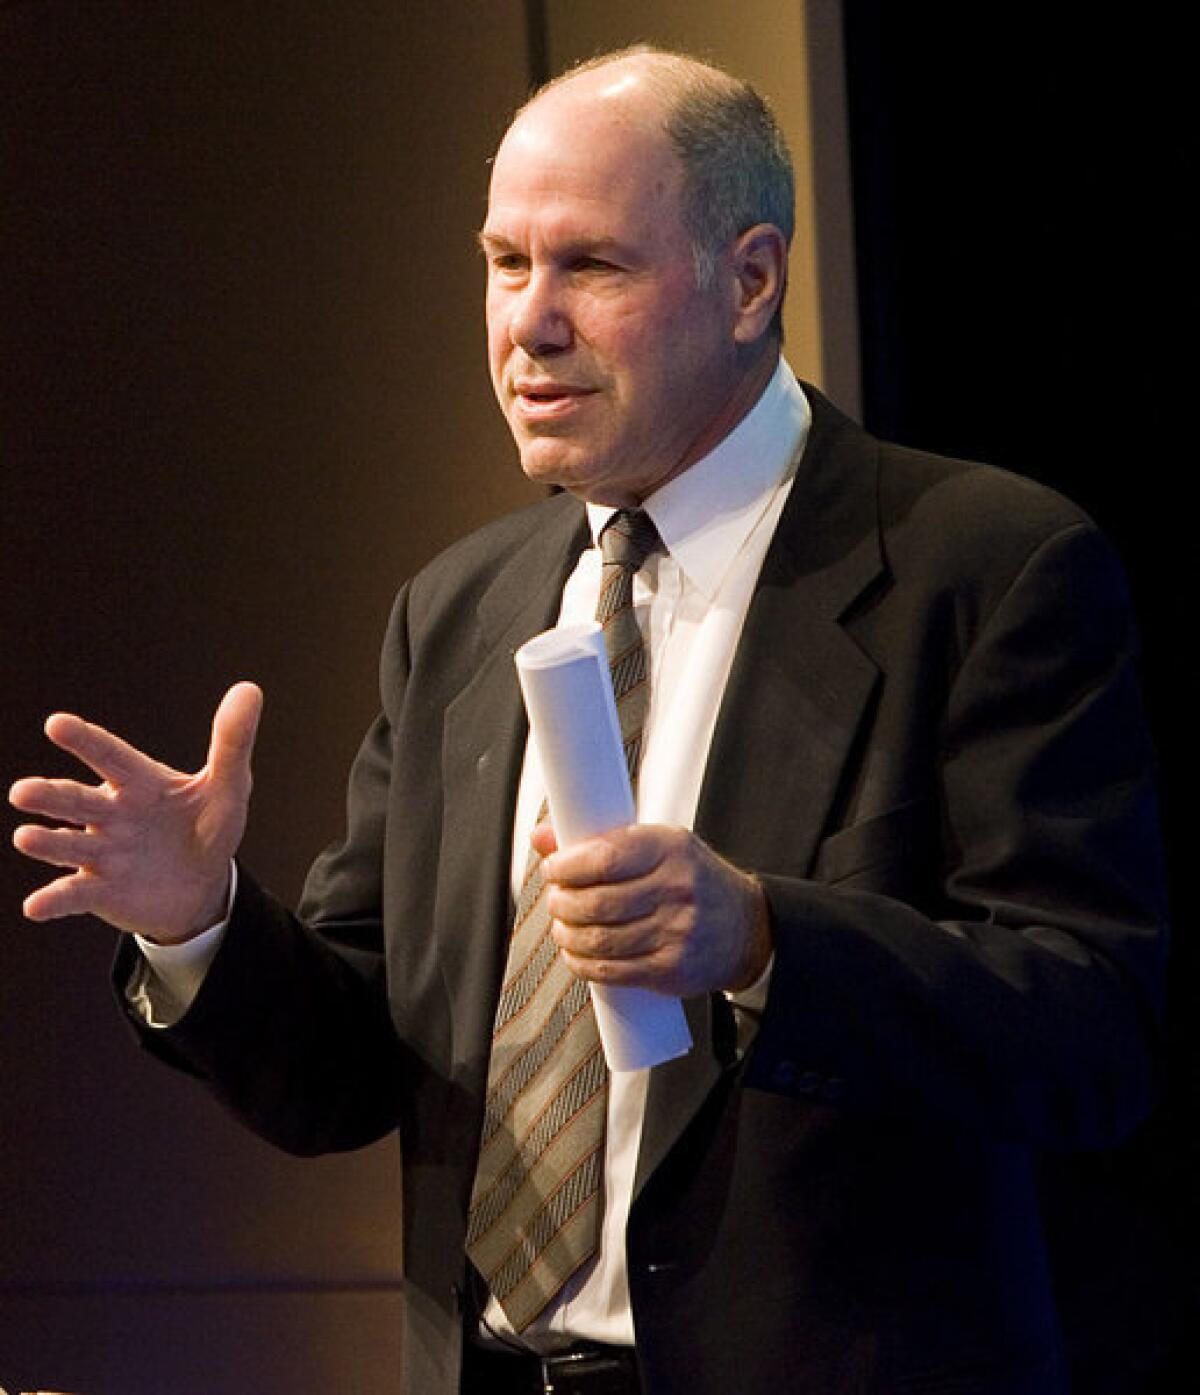 Former Walt Disney Co. Chief Executive Michael Eisner signed a multi-year film distribution deal with Universal Pictures. The larger studio will market and distribute films financed by Eisner's Tornante.